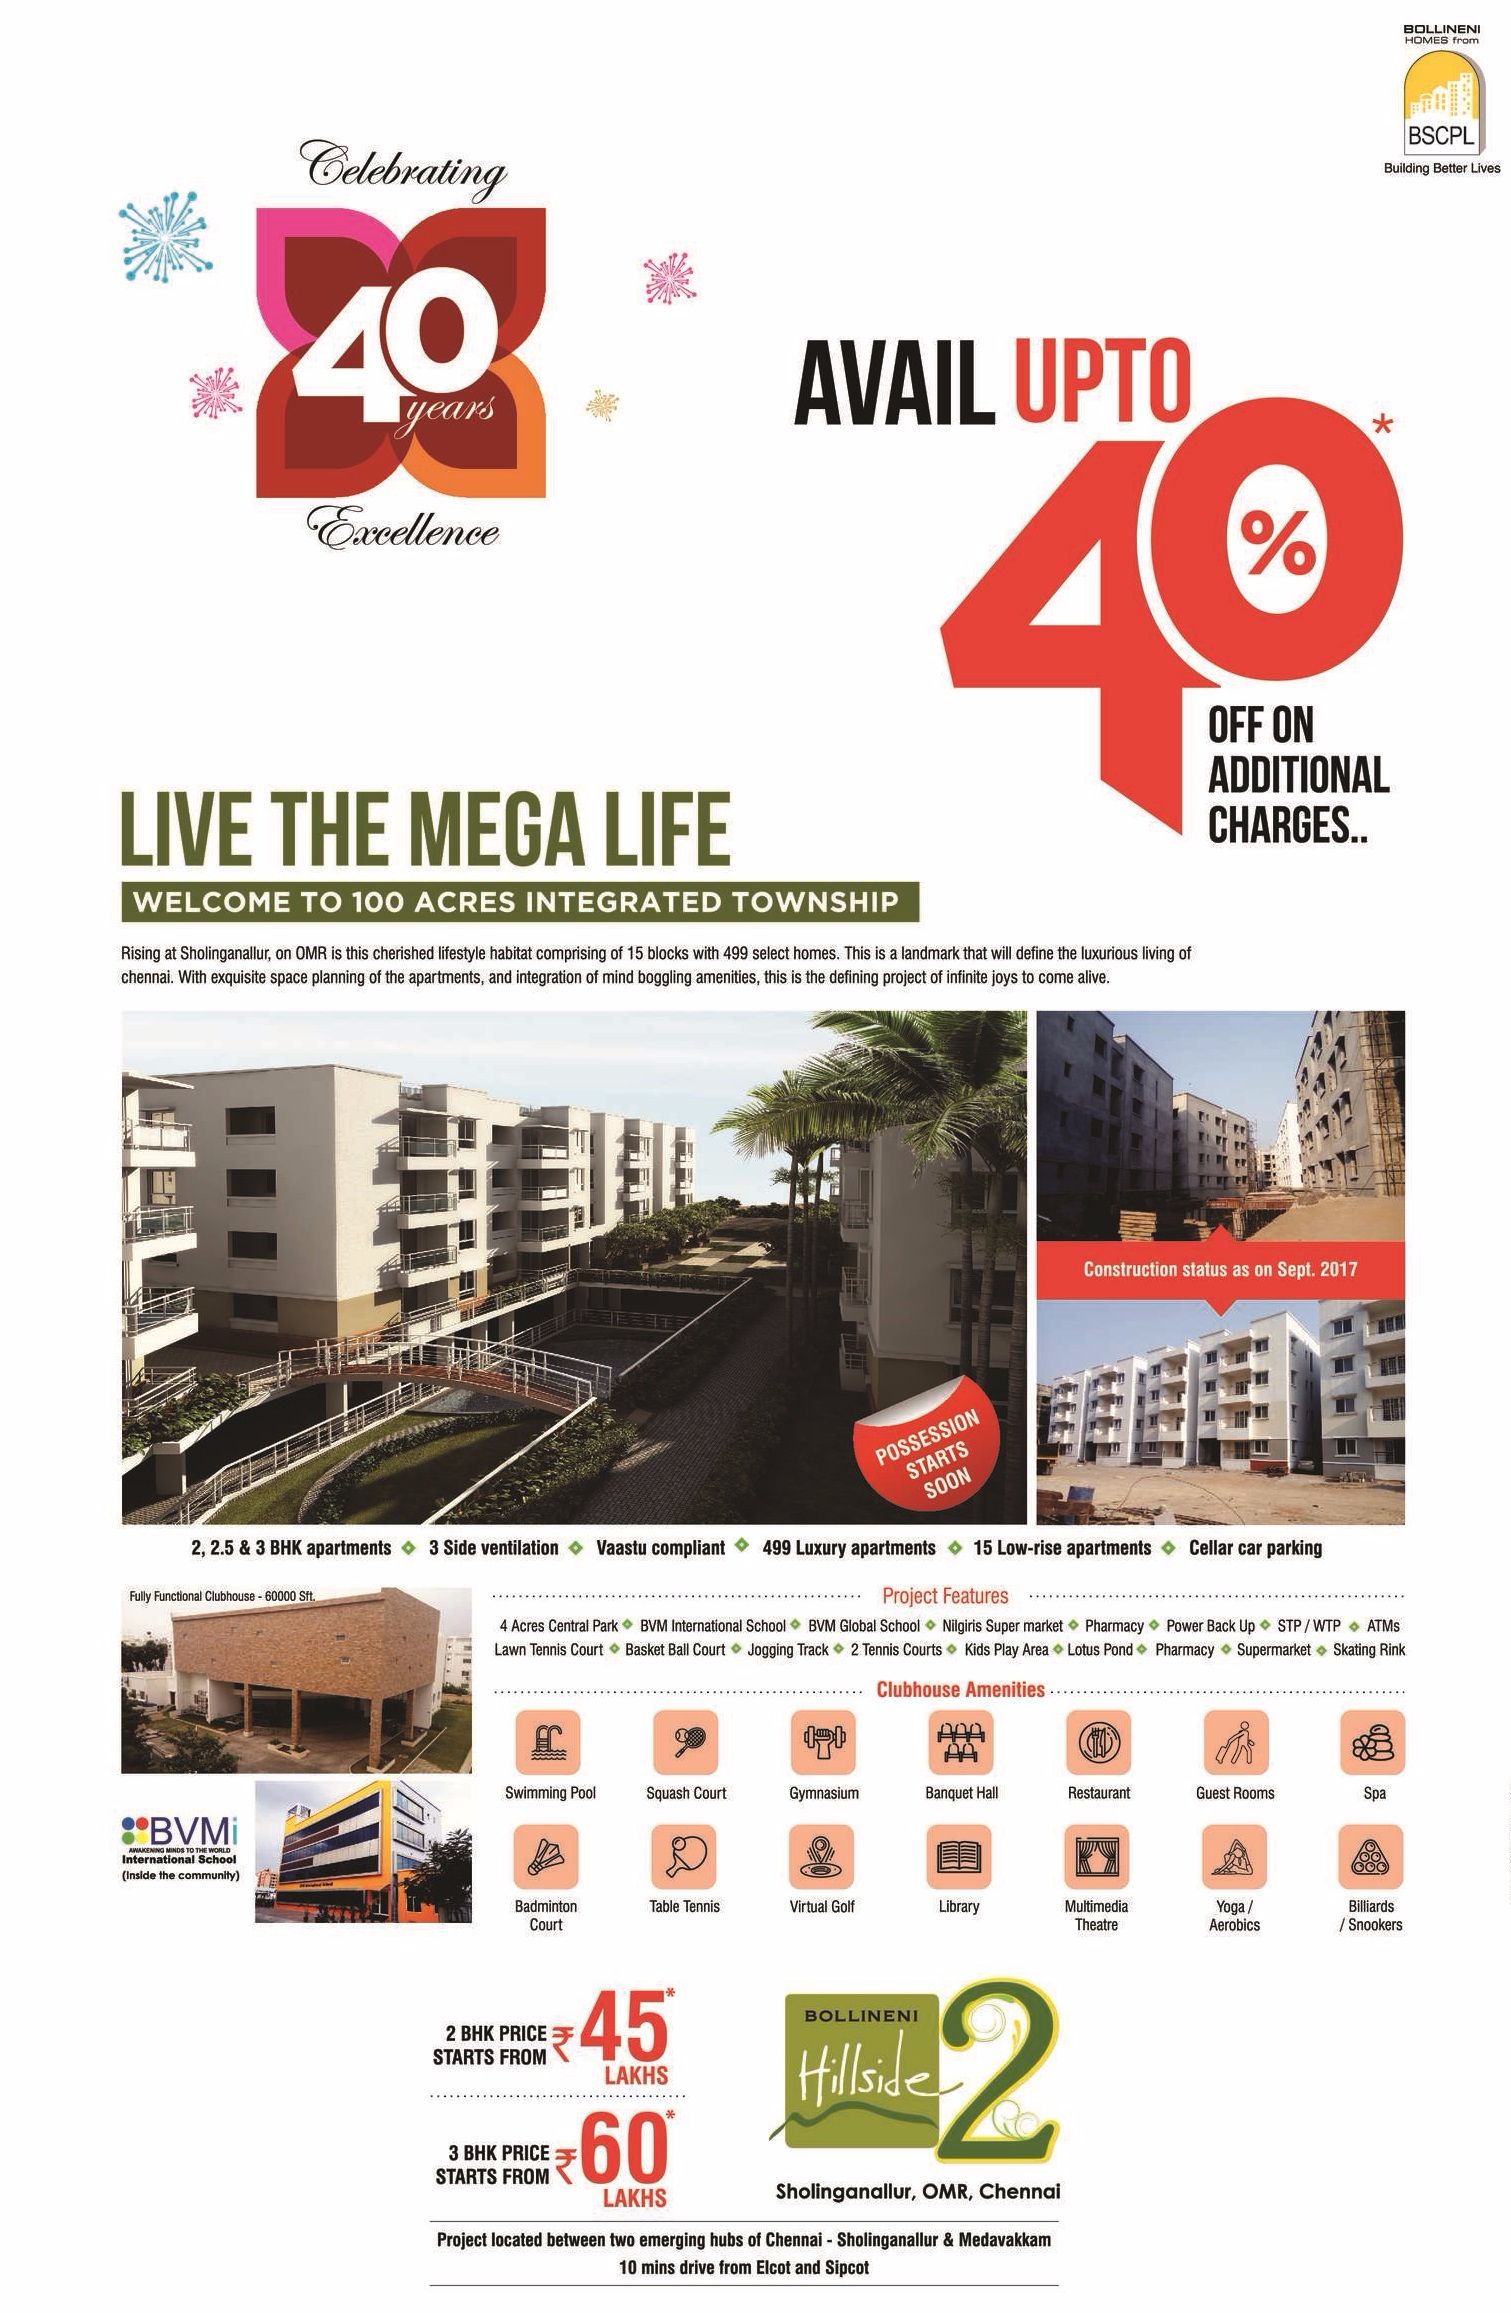 Live the mega life in 100 acres integrated township at BSCPL Bollineni Hillside II in Chennai Update